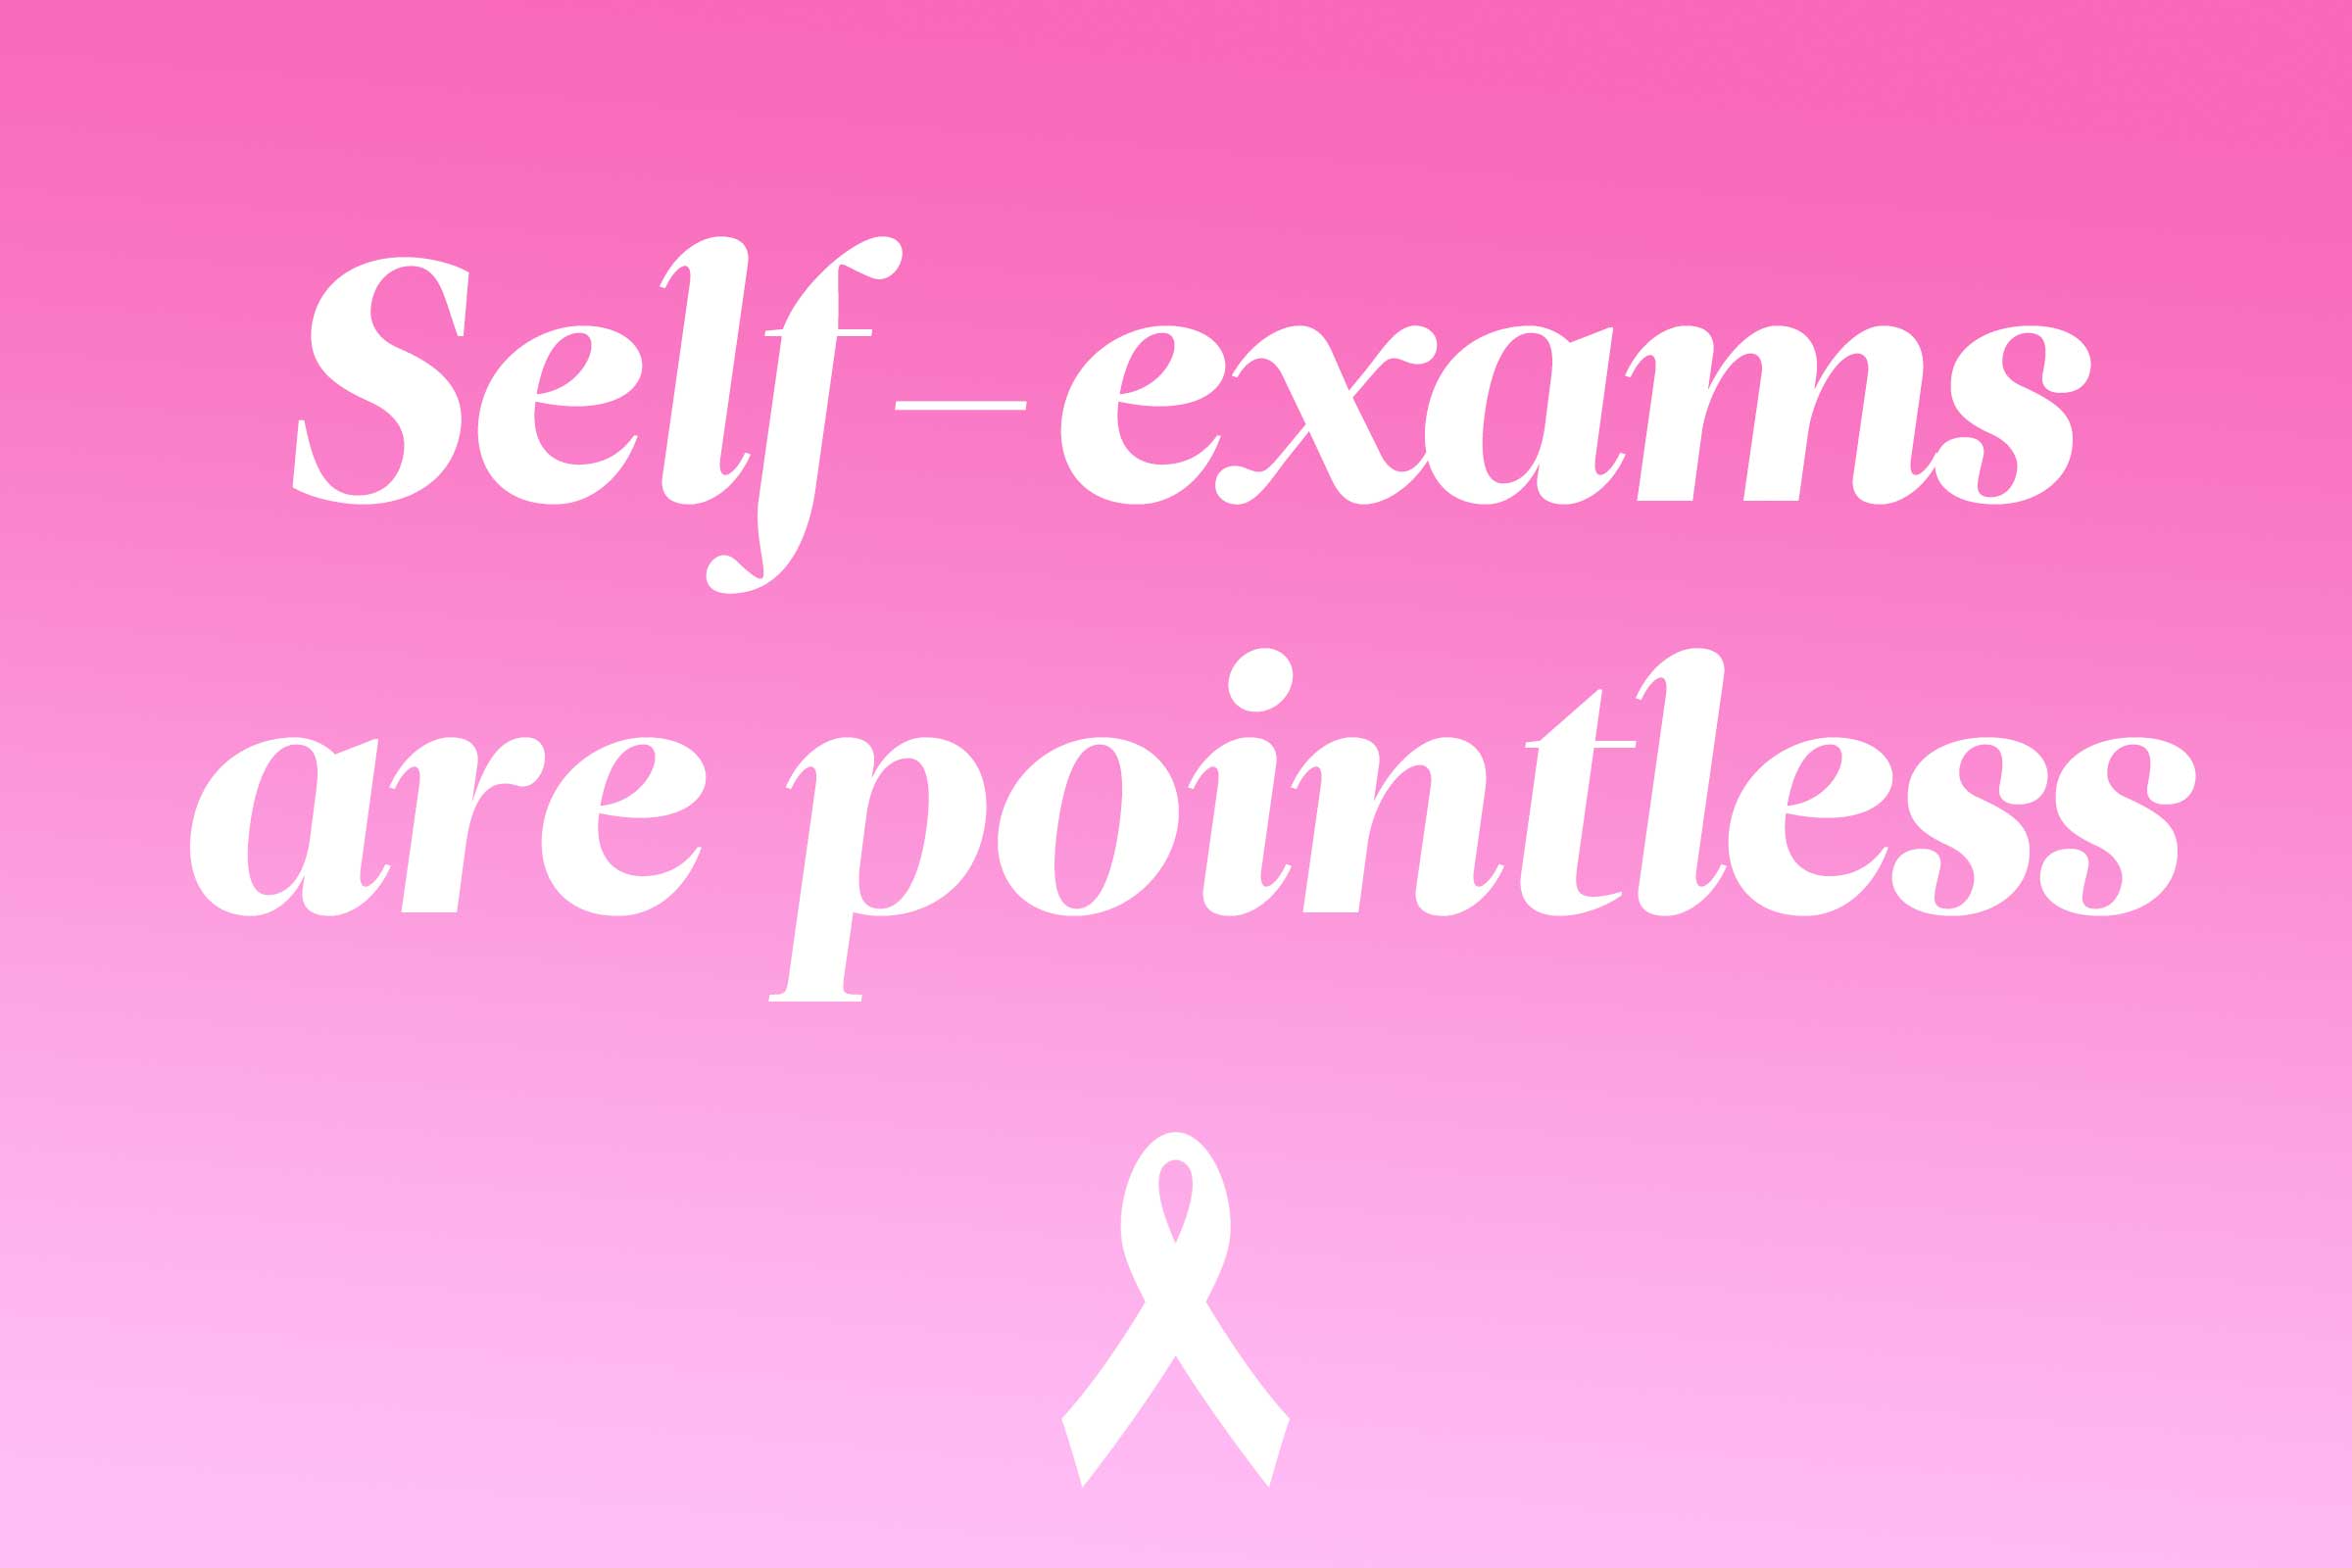 myth: self-exams are pointless